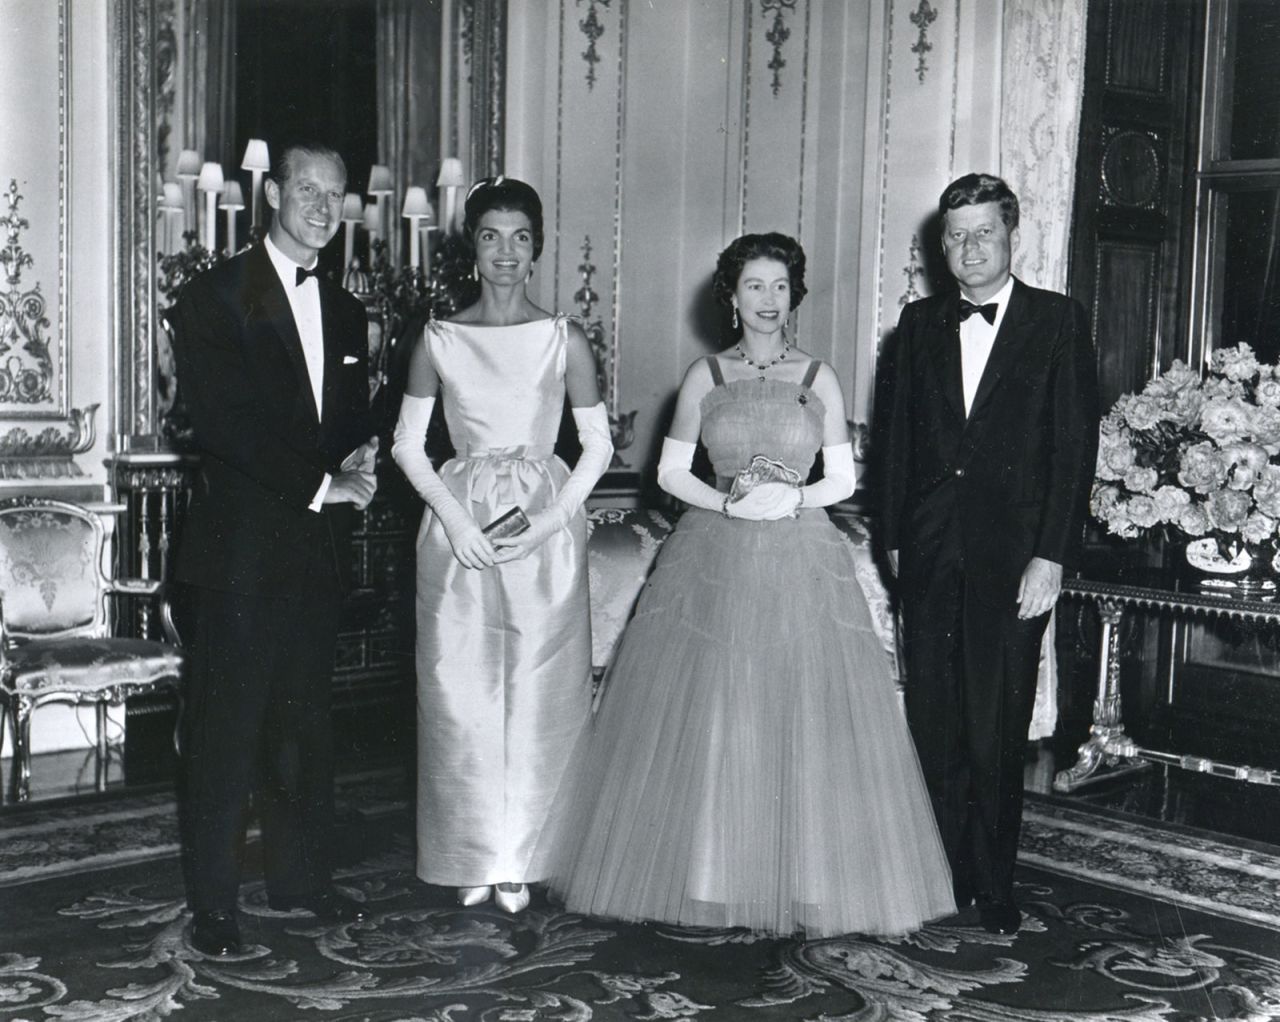 <strong>John F. Kennedy:</strong> Amid much fanfare and huge media interest, Kennedy and his wife, Jackie, were dinner guests at Buckingham Palace in June 1961. He later wrote that he would "cherish the memory of that delightful evening," in a birthday letter written to the Queen. He added: "The people of the United States join with me in extending to your Majesty and to the people of the Commonwealth best wishes and hearty congratulations on the occasion of the celebration of your birthday. ... May I also at the same time say how grateful my wife and I are for the cordial hospitality offered to us by your Majesty and Prince Phillip during our visit to London last Monday. We shall always cherish the memory of that delightful evening."